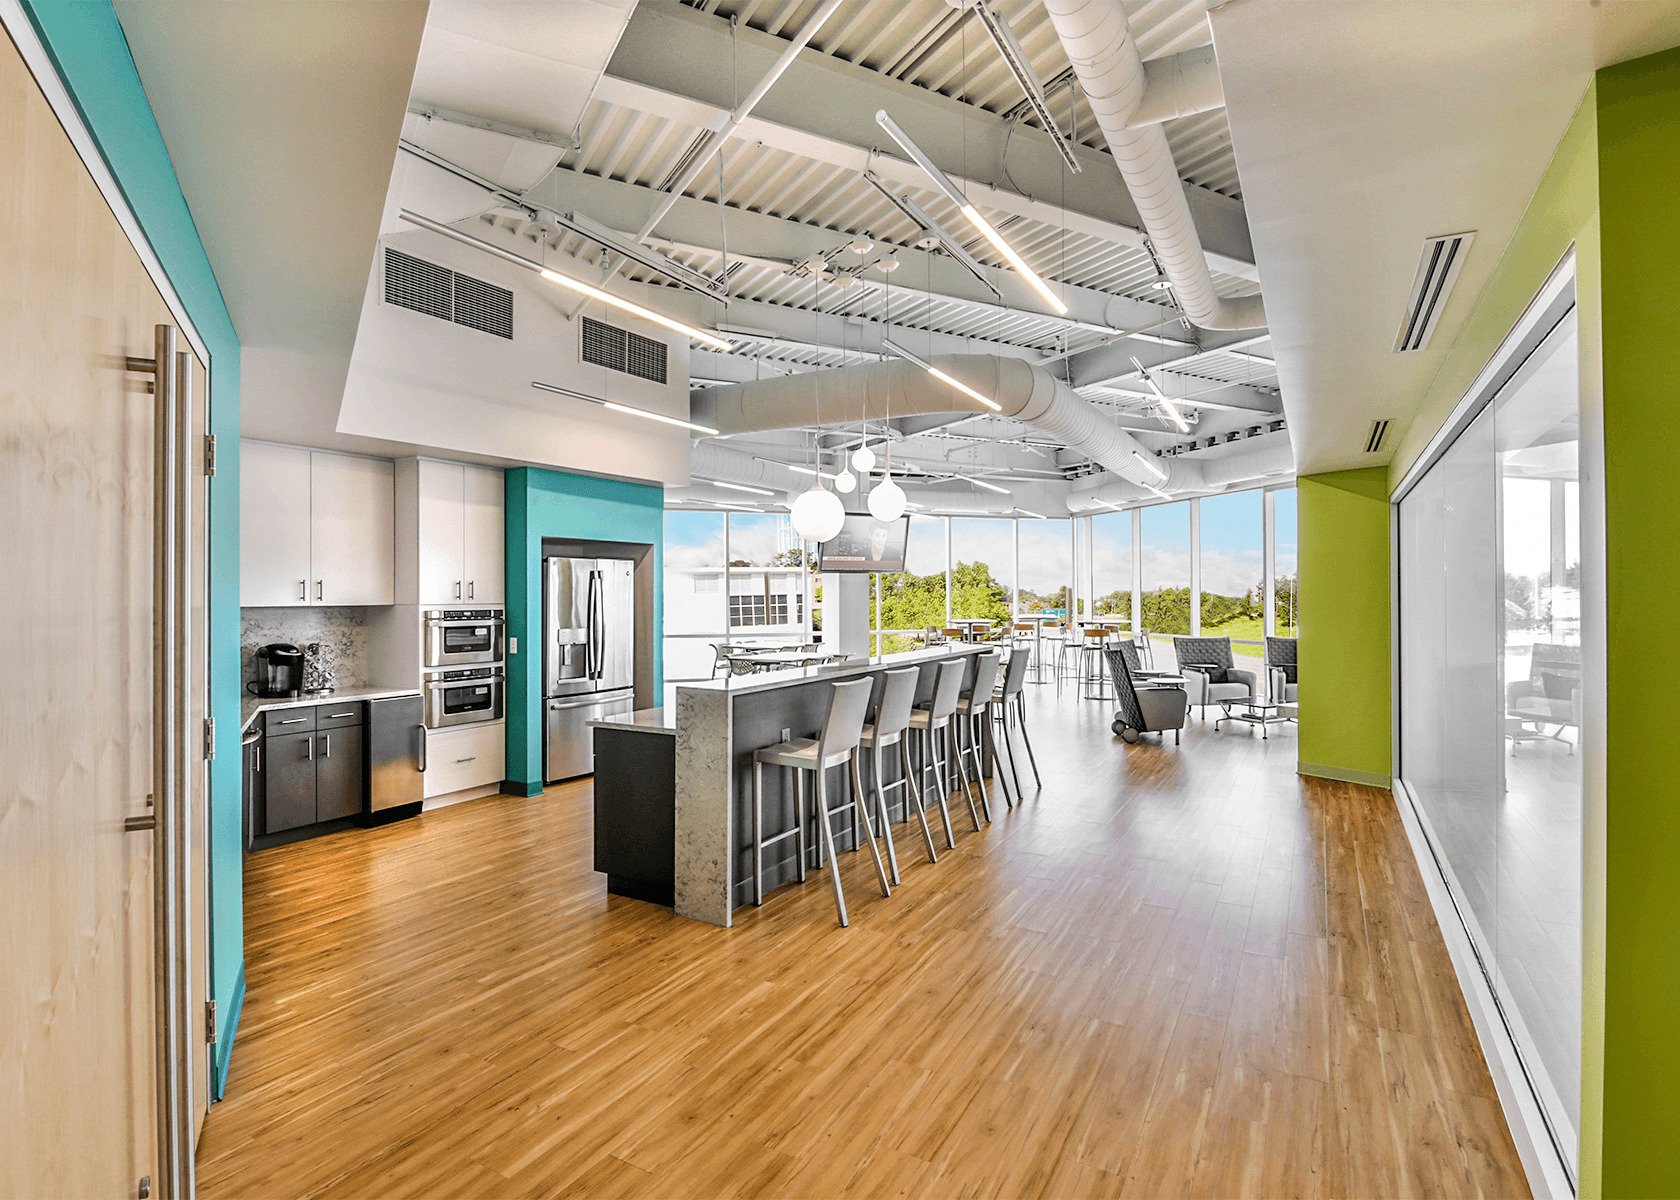 large café/break area with bright green and turquoise walls and light wood floors